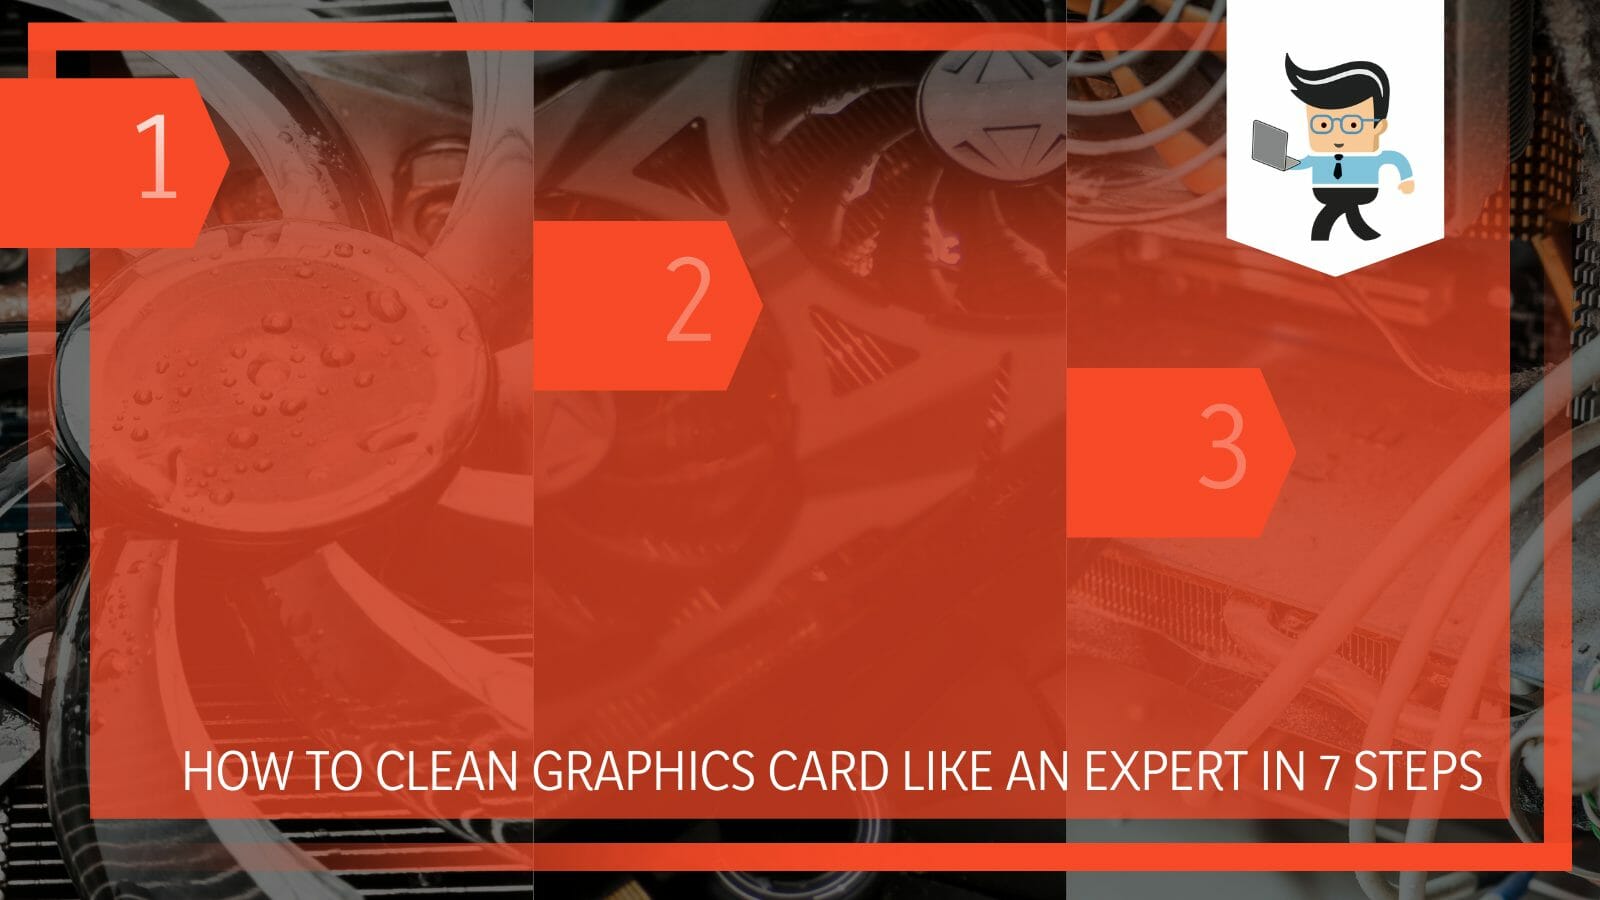 Clean Graphics Card Like an Expert in 7 Steps